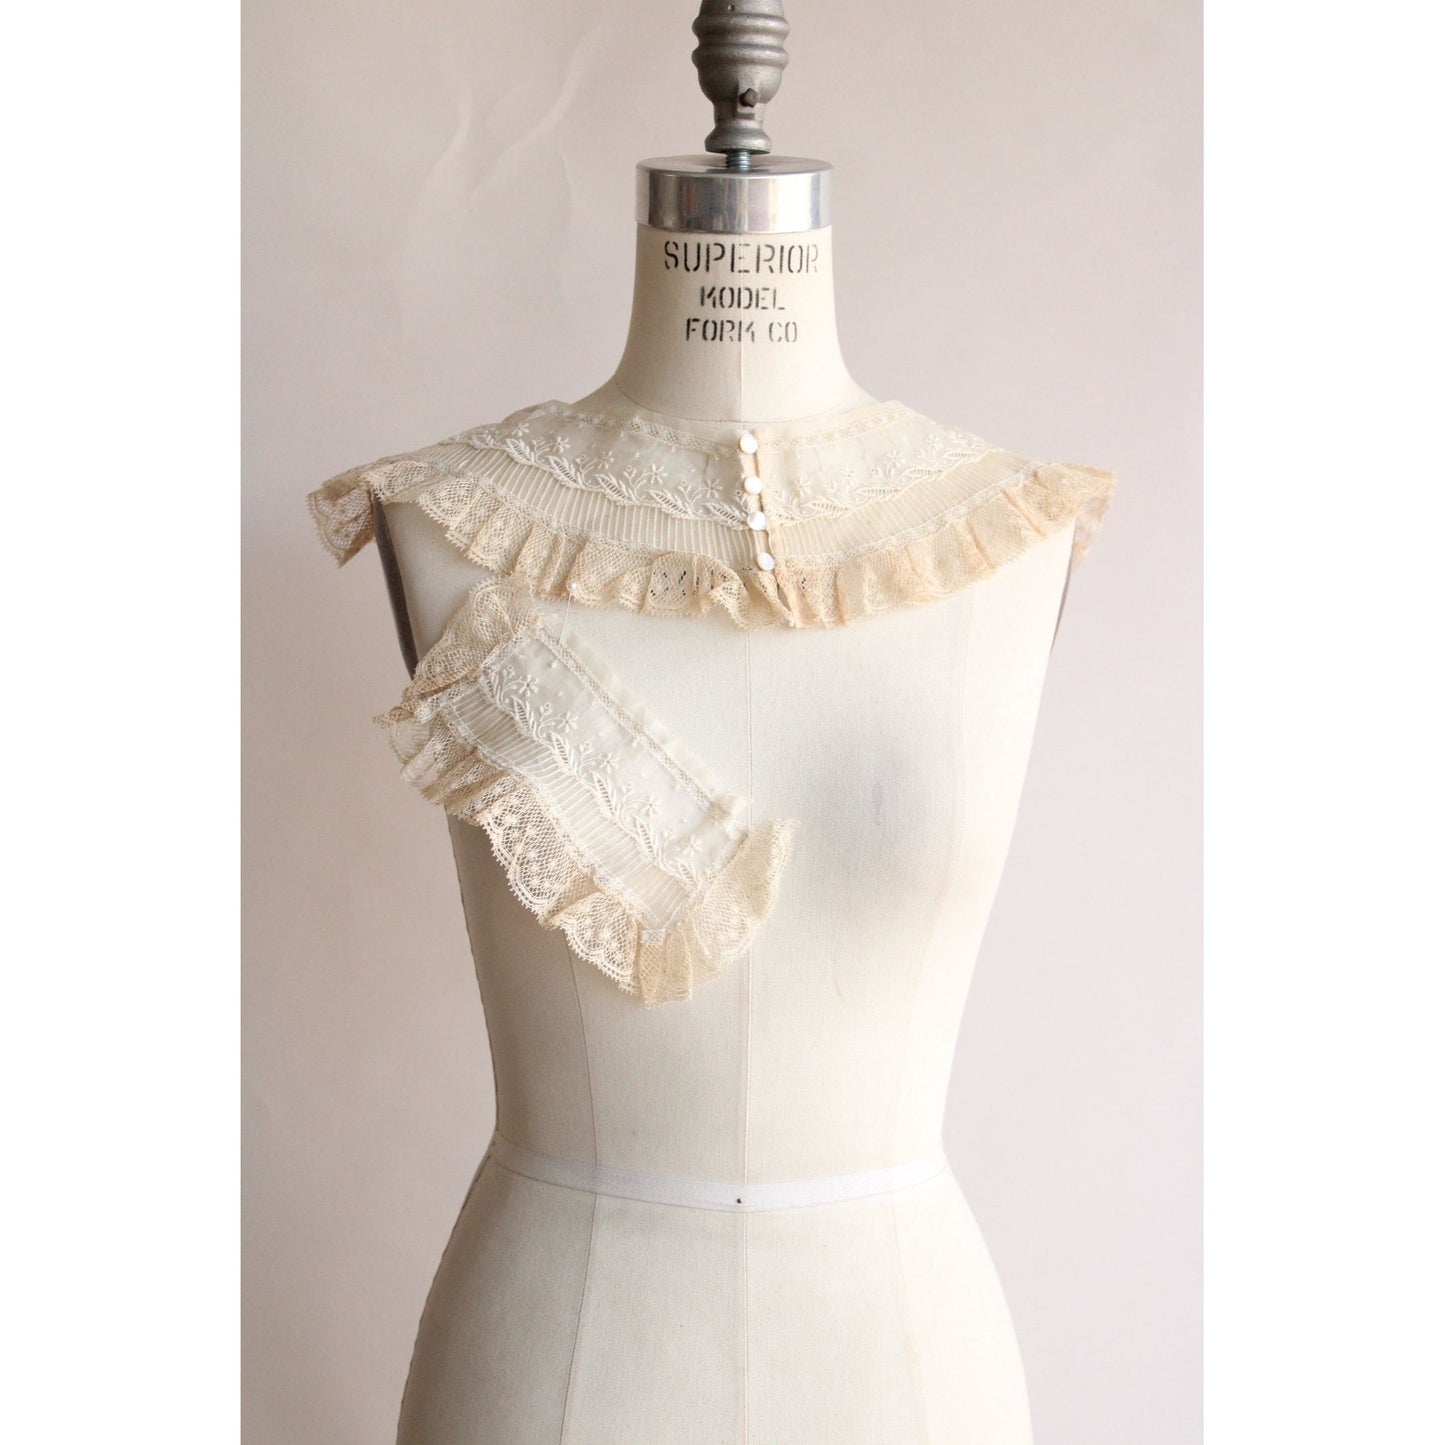 Vintage 1900s 1910s Collar in Beige Lace